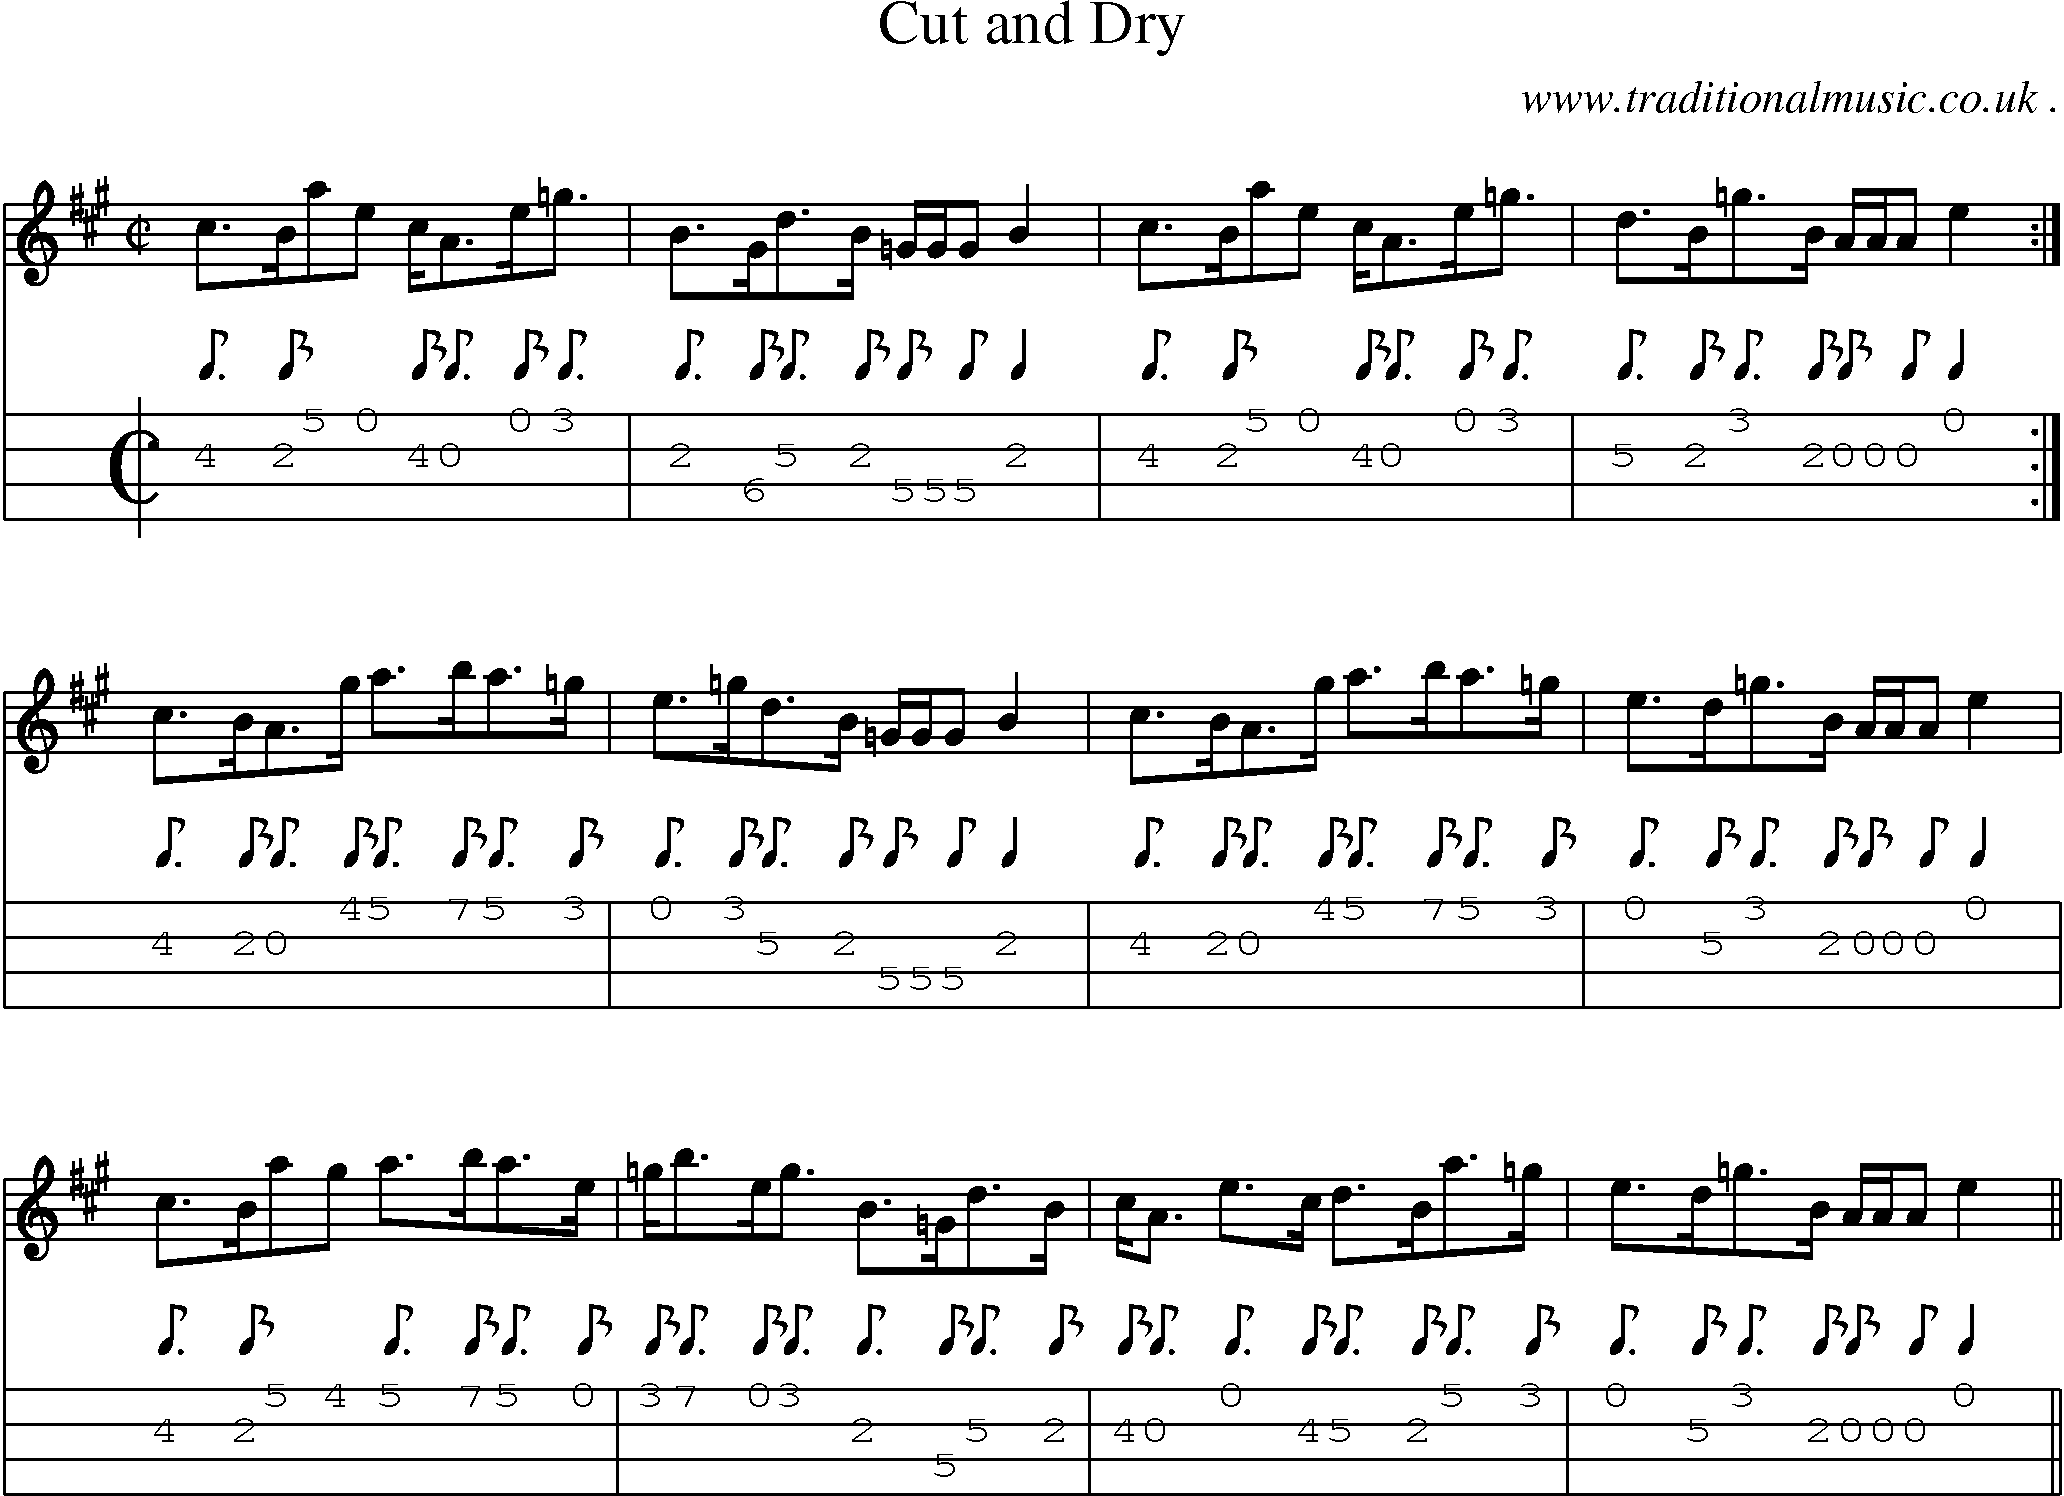 Sheet-music  score, Chords and Mandolin Tabs for Cut And Dry